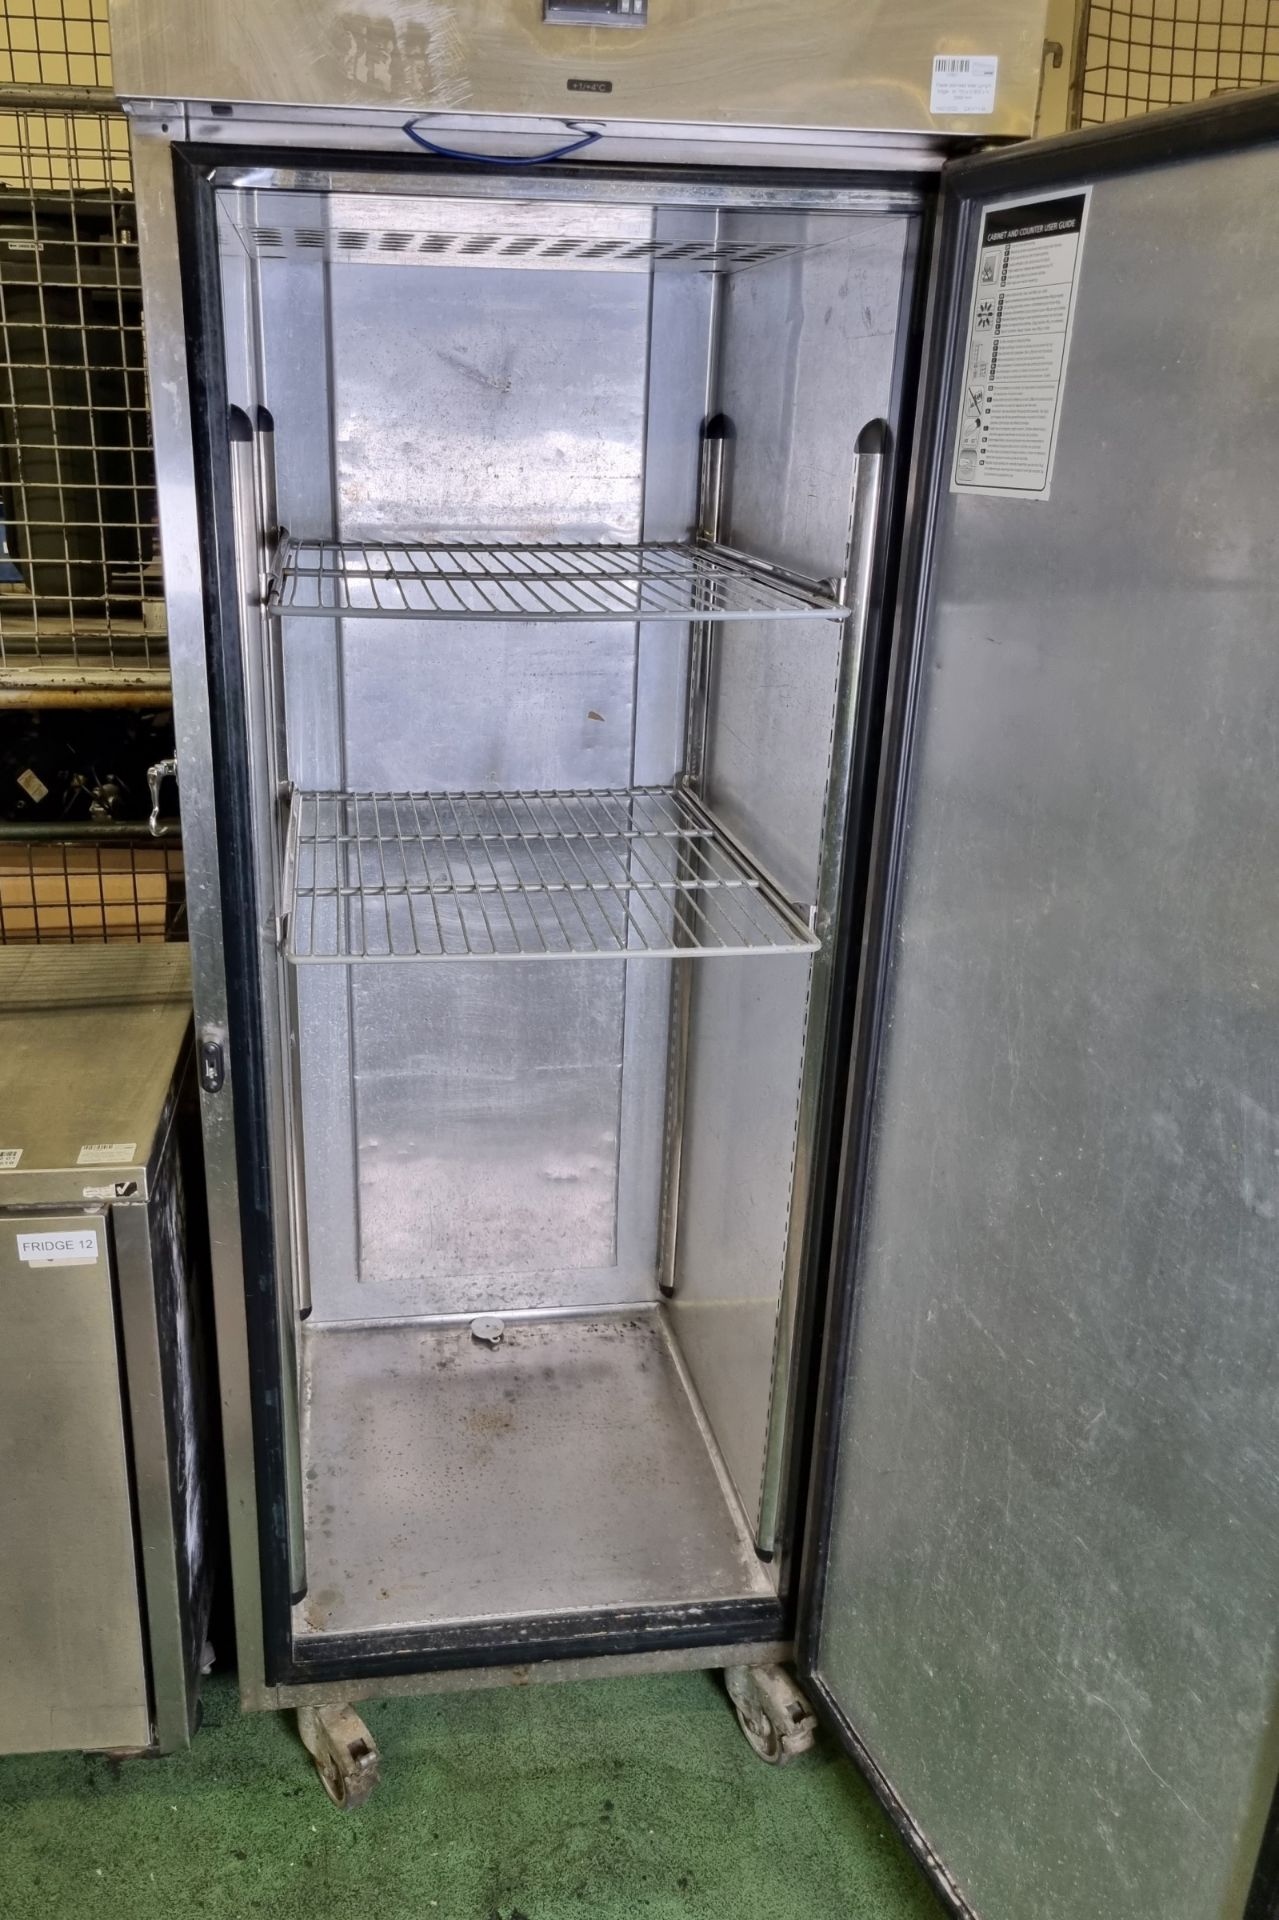 Foster stainless steel upright fridge - W 700 x D 800 x H 2090 mm - Image 4 of 6